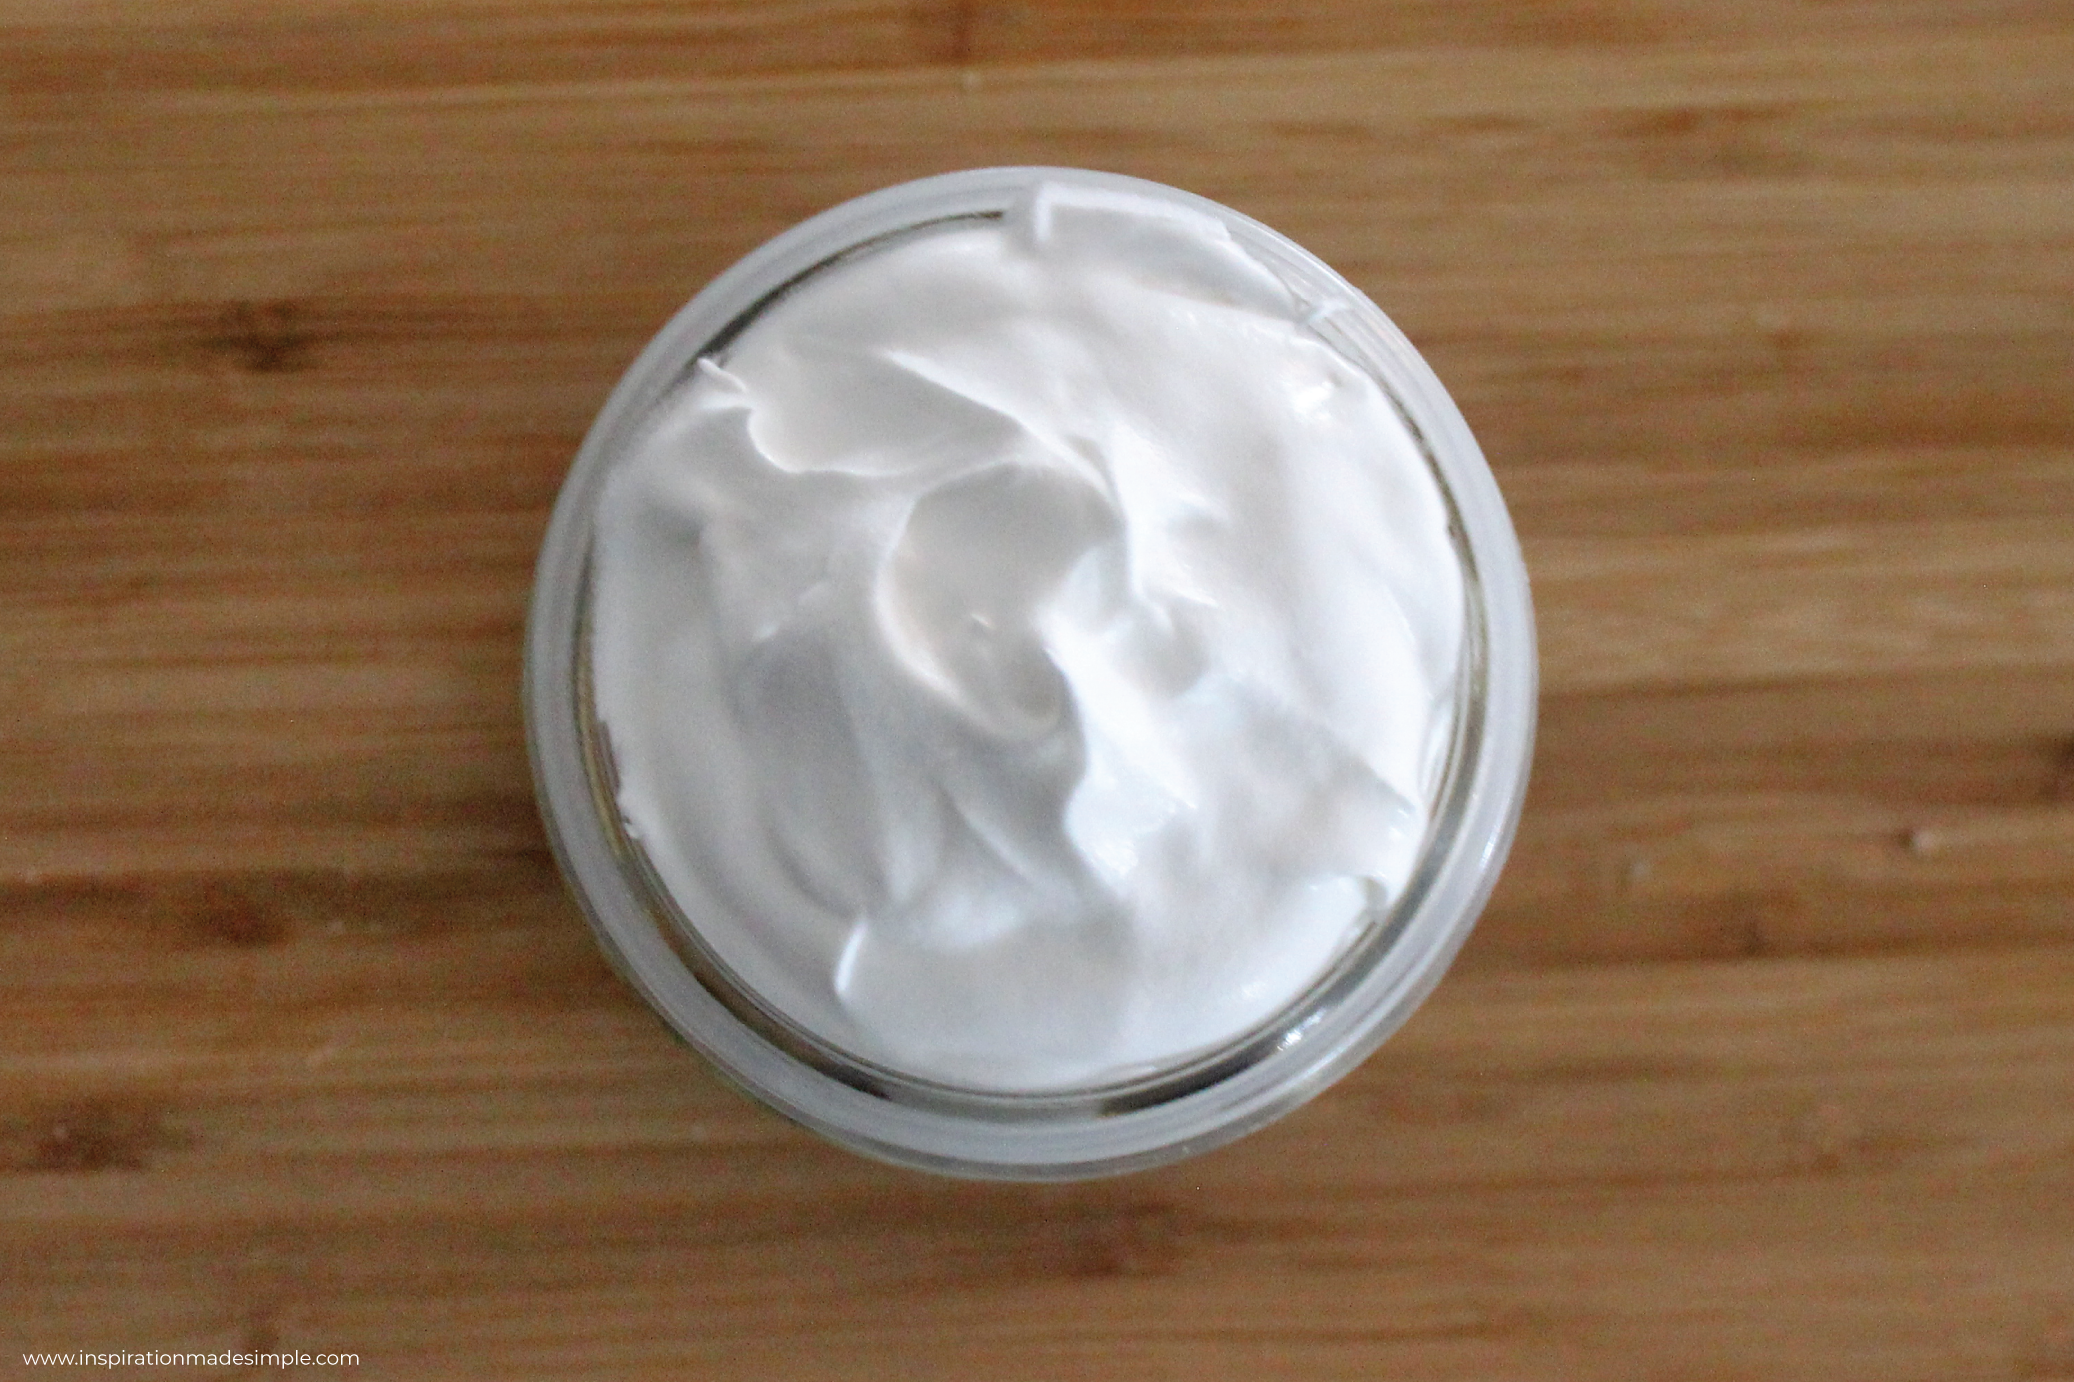 Whipped Cream Layer of a Trifle